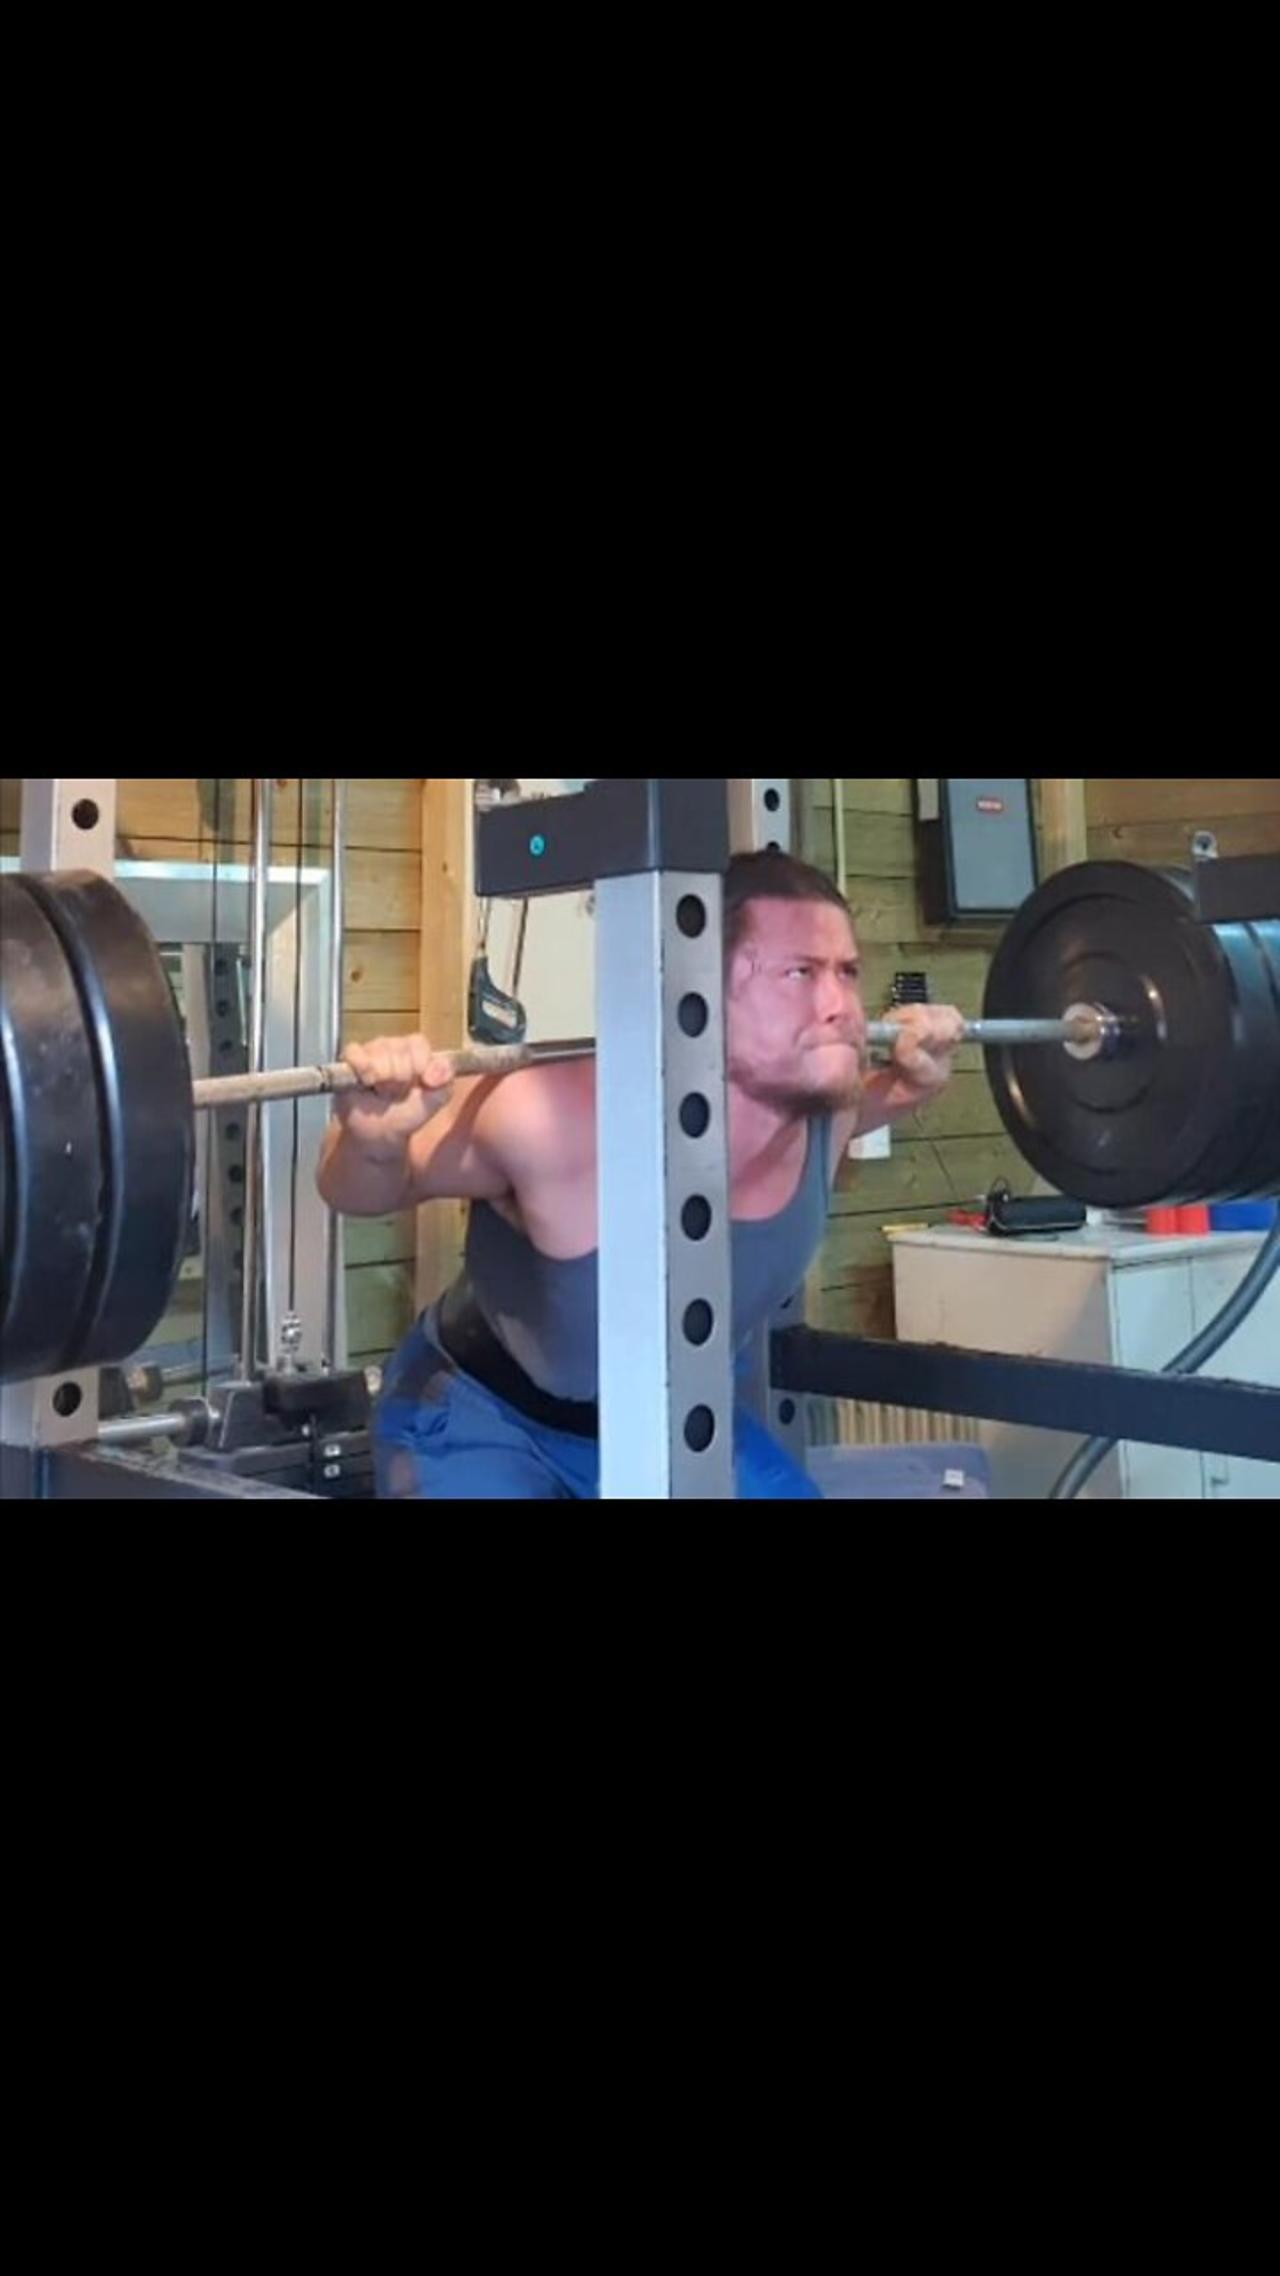 170 Kgs x 4 Squat. Not quite there, today!